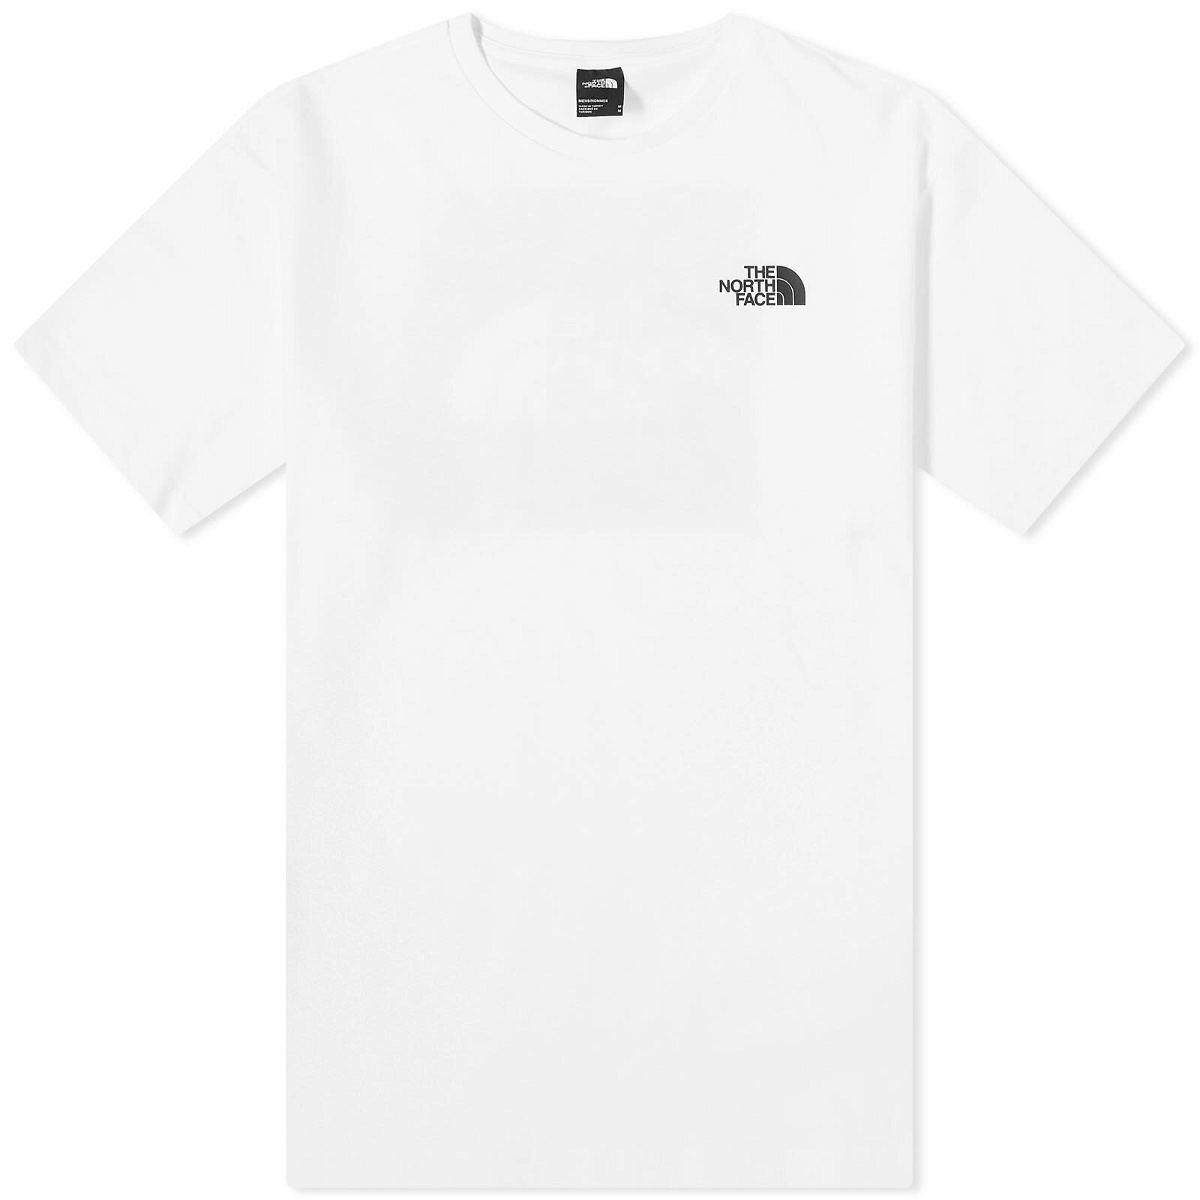 The North Face Men's Graphic T-Shirt in Tnf Black/Brandy Brown The